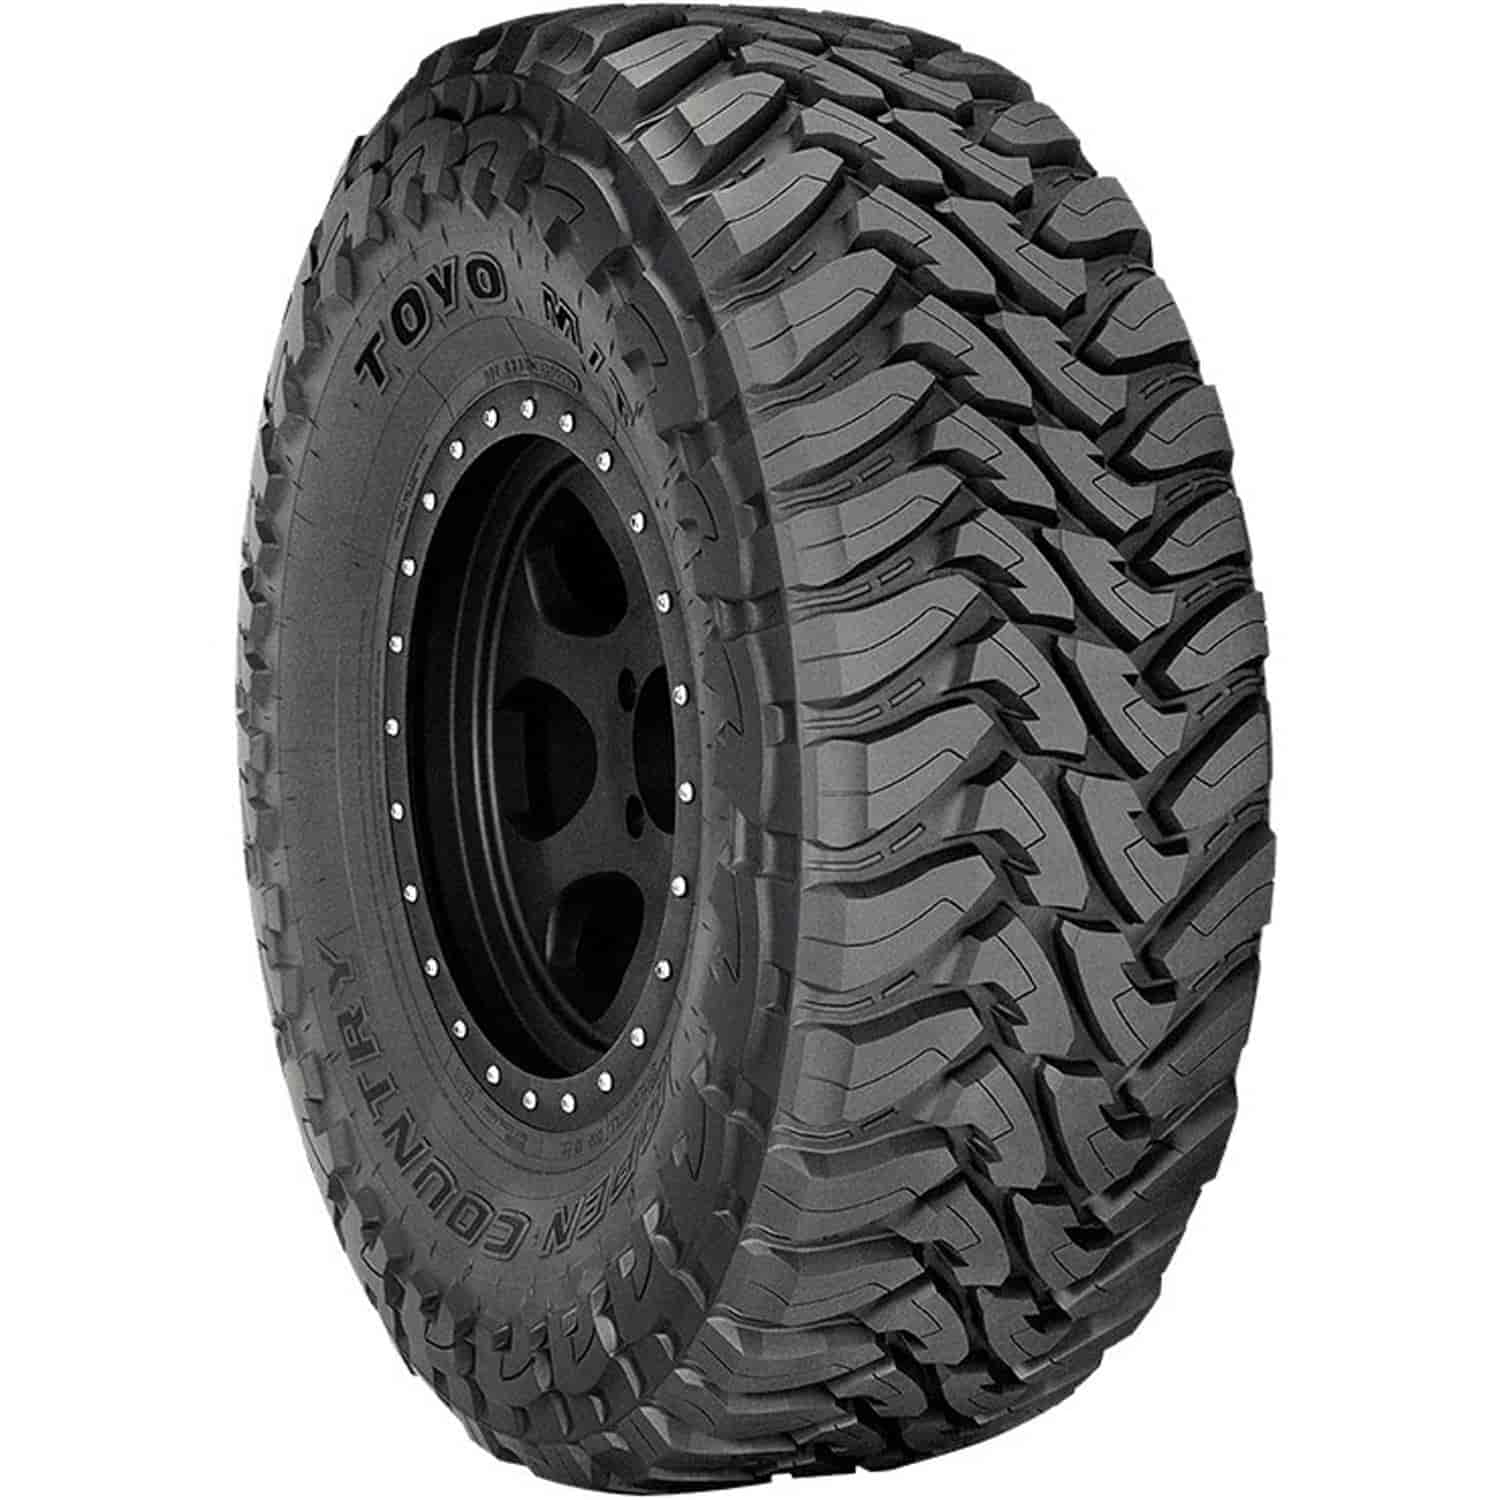 Open Country M/T Tire LT265/70R18